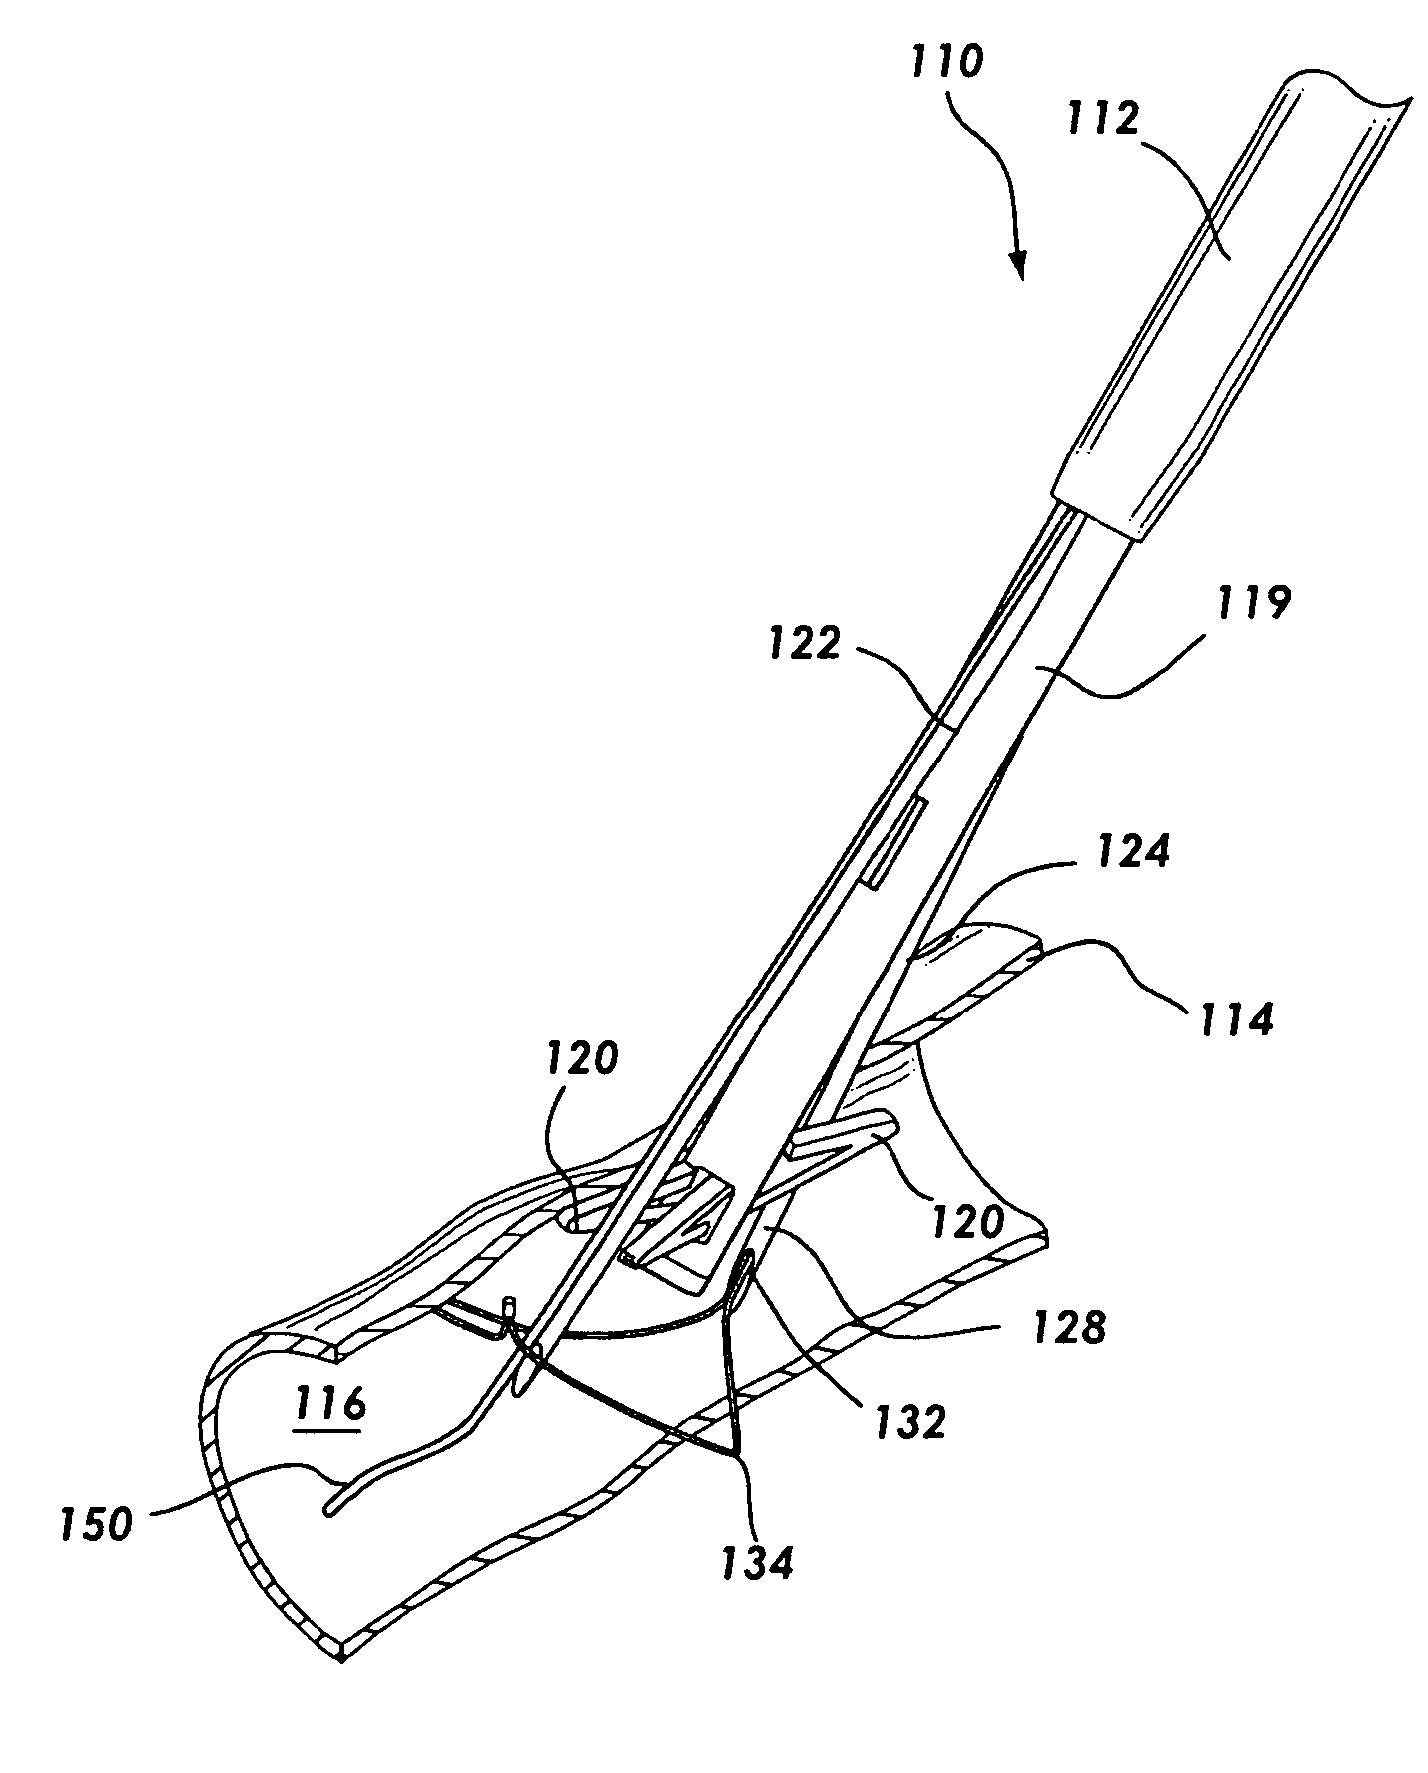 Suture based vascular closure apparatus and method incorporating a pre-tied knot